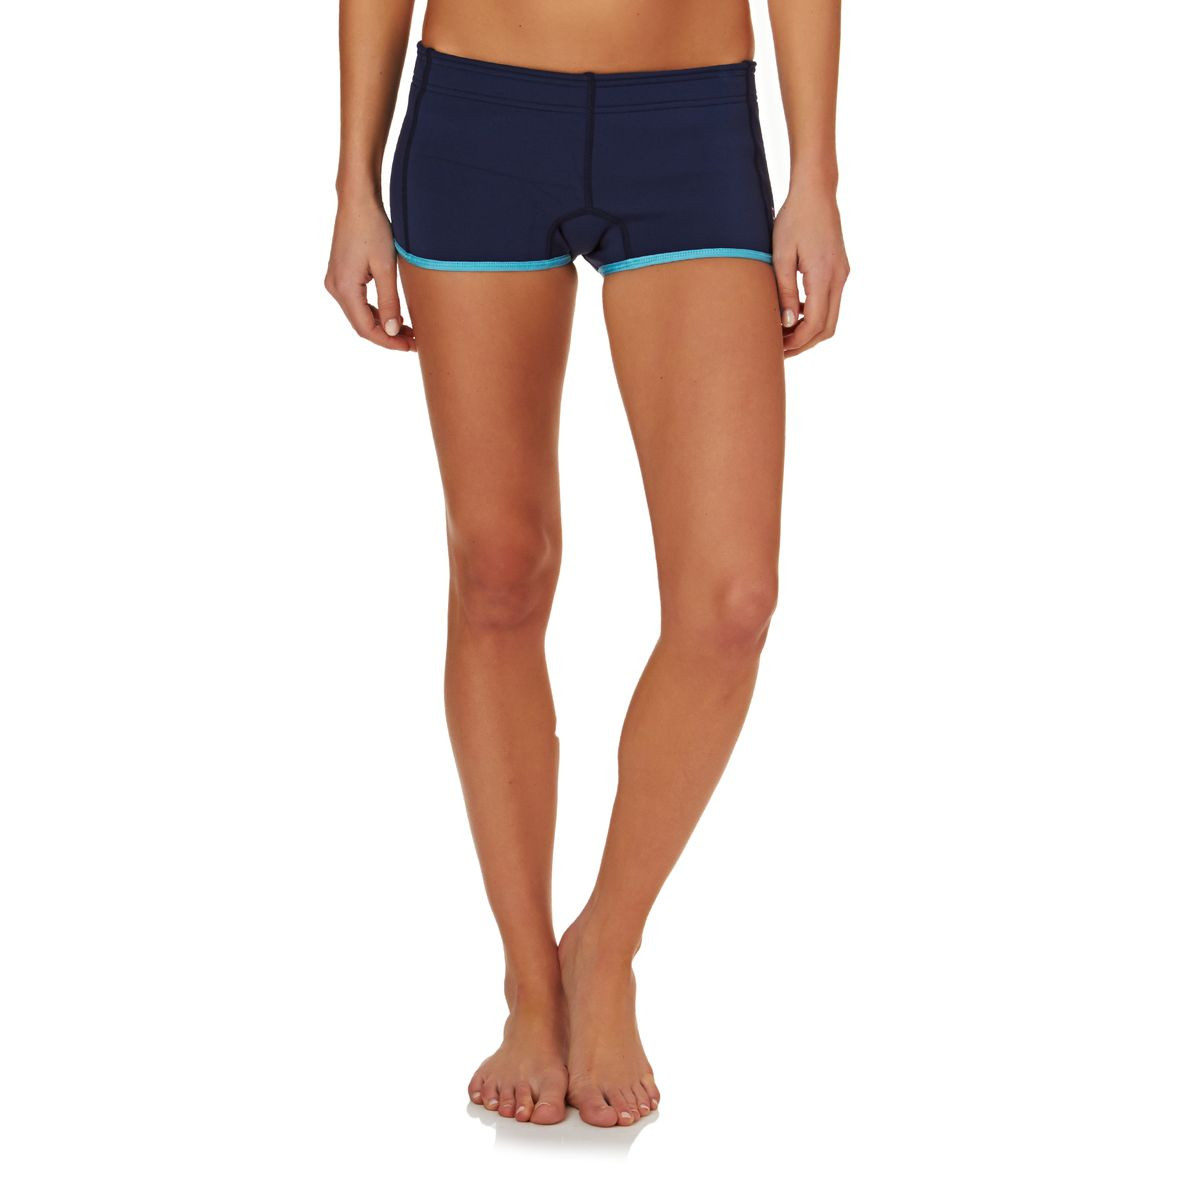 Roxy Womens Syncro 1mm Reef Wetsuit Shorts - Blue Print